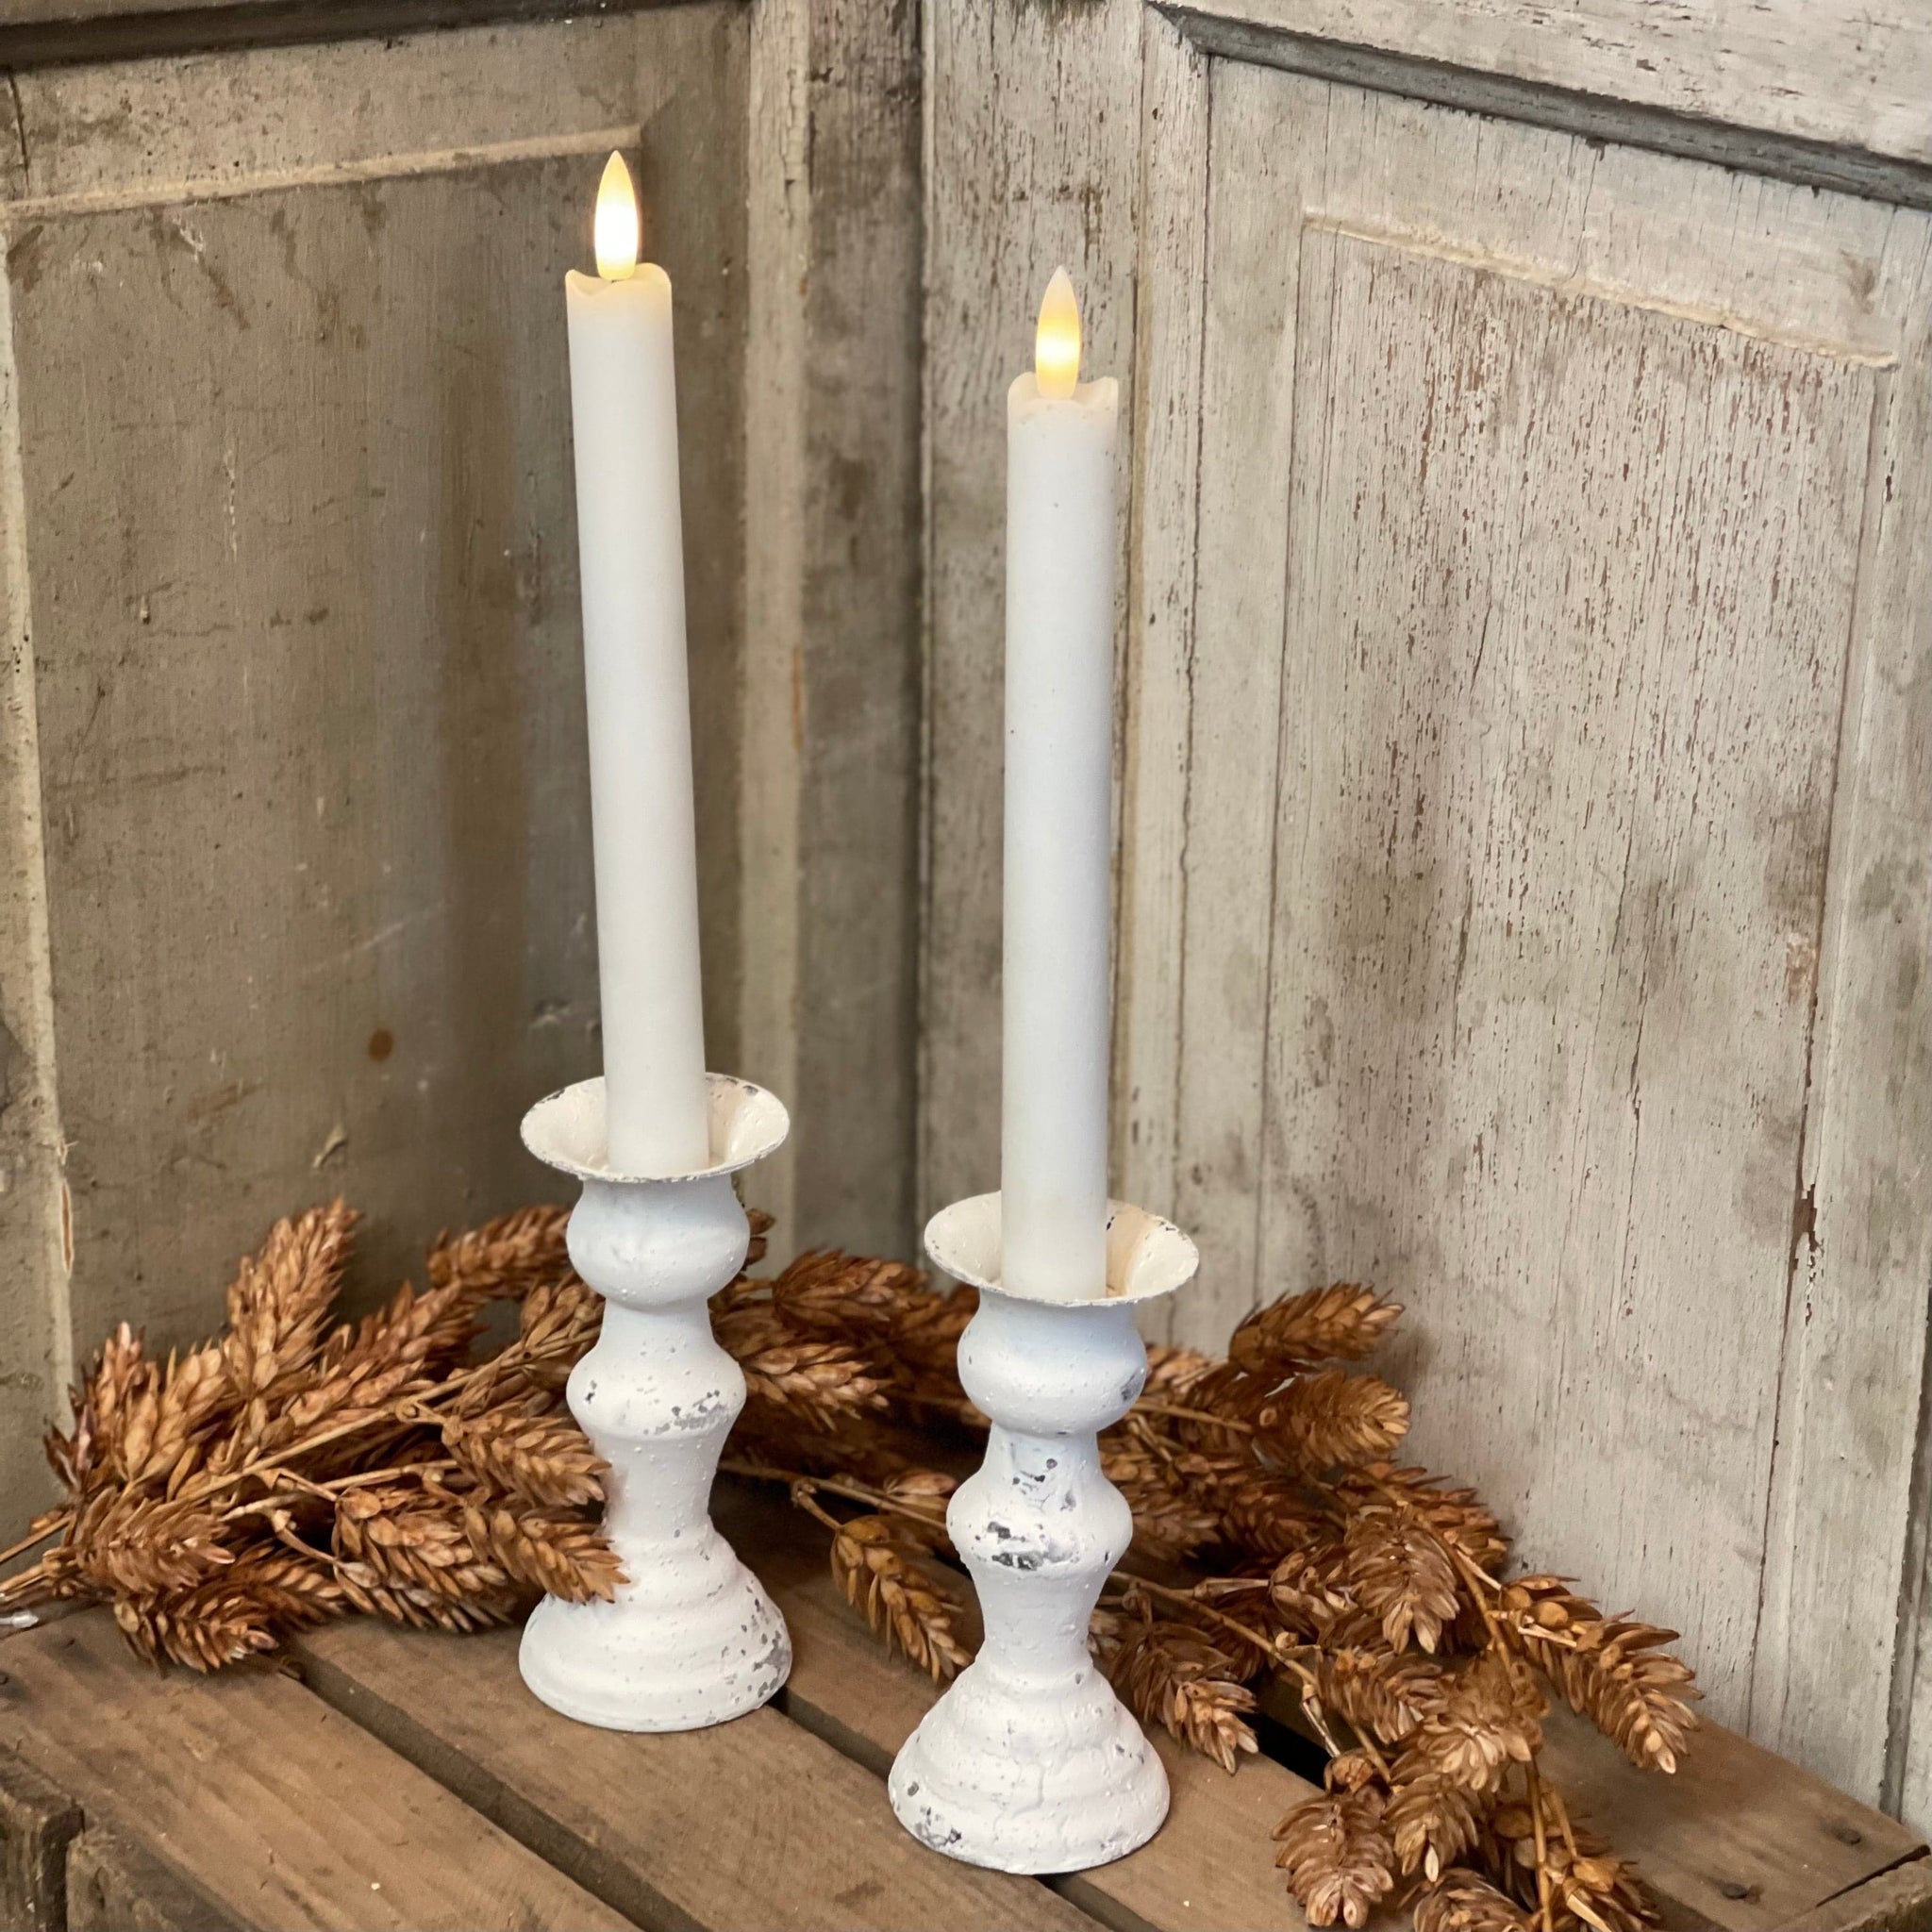 5.5" Rustic White Candle Holders | Set of 2 Country, Country Decor, Country Home, Country Kitchen Decor, Everyday, Farmhouse Decor, Farmhouse Decorating, Home Accents, New, Primitive, Primitive Decor, Primitive Decorating, Spring 